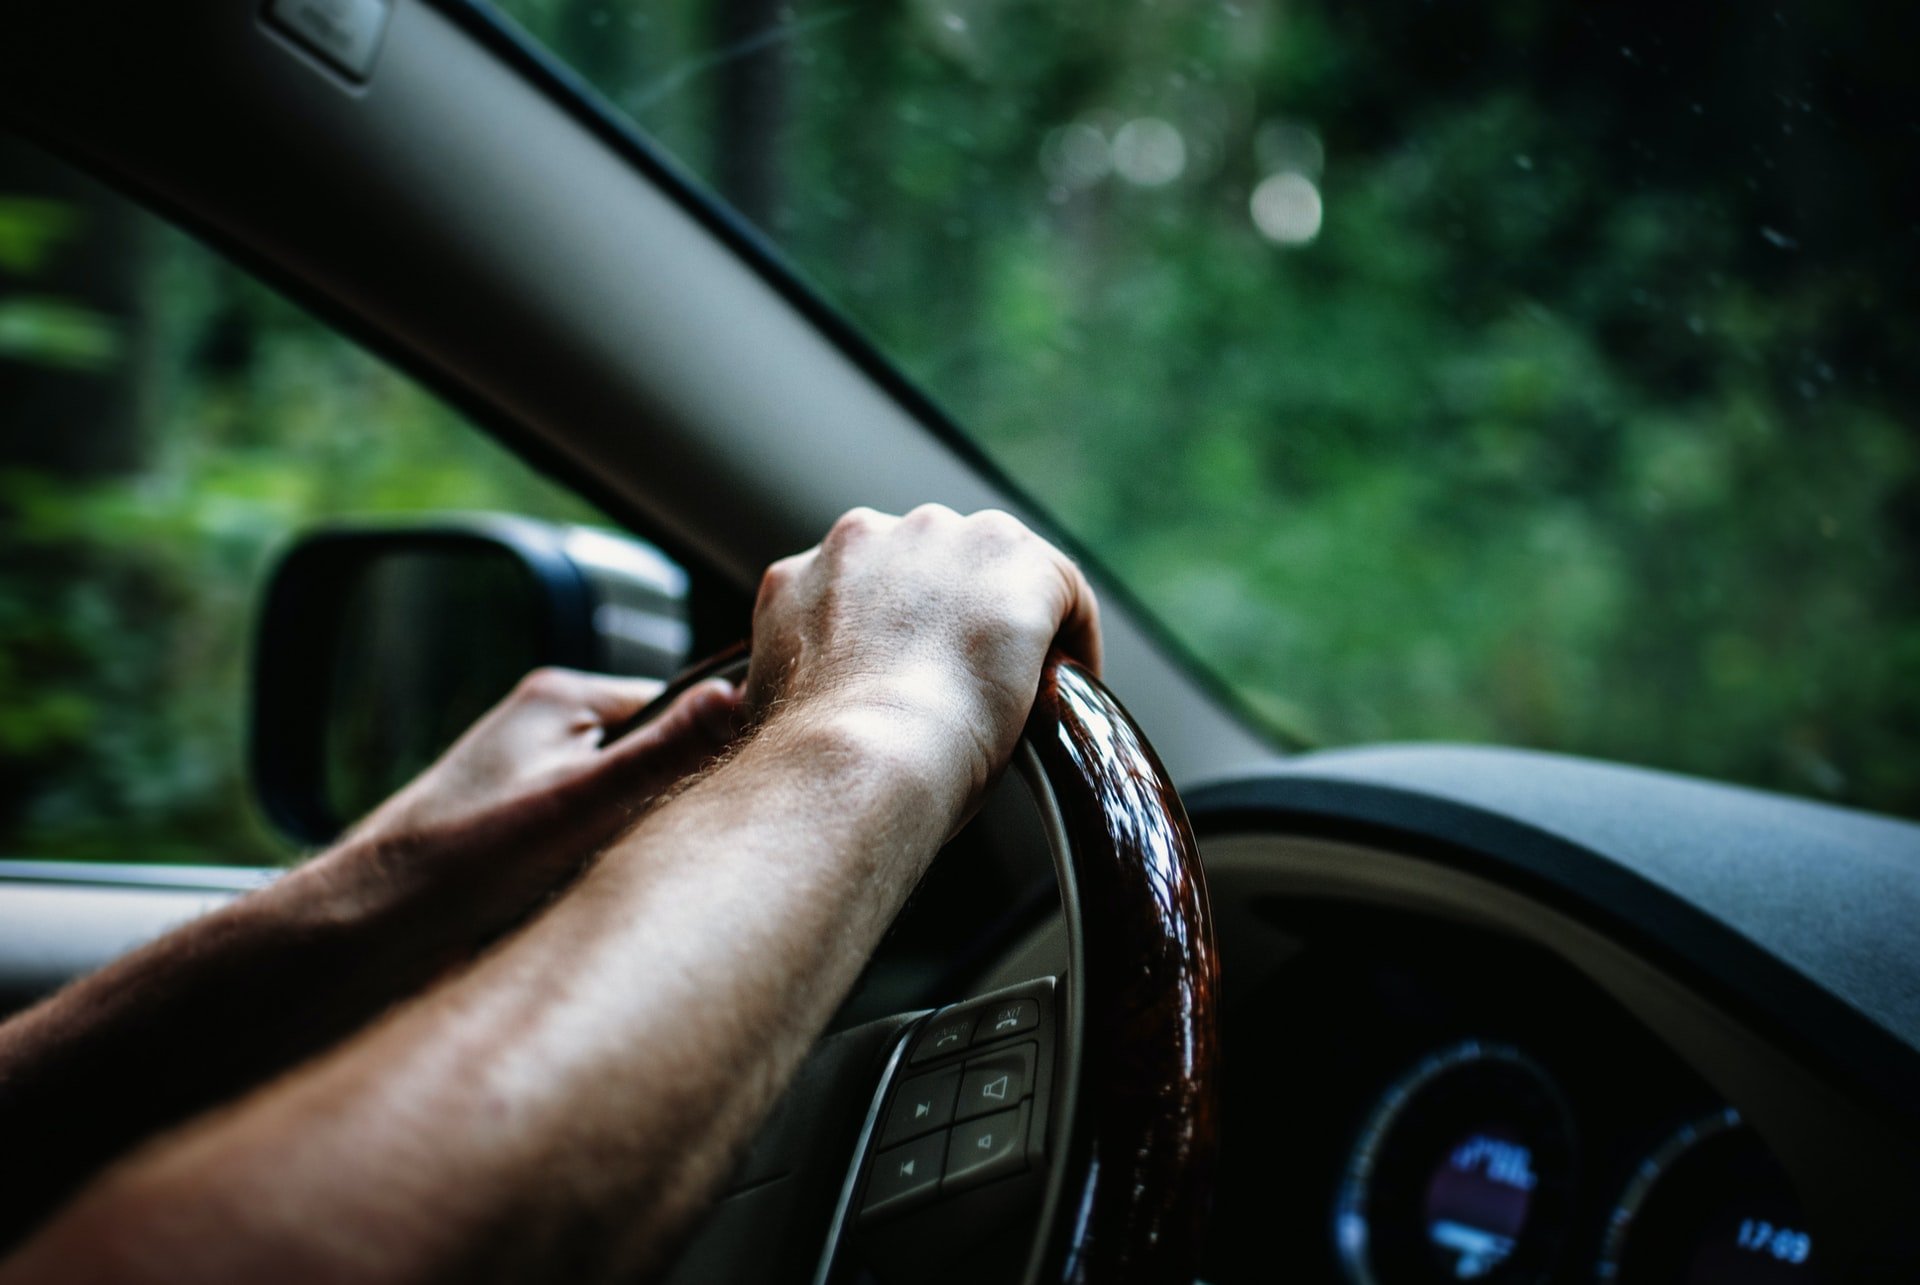 He drove to his grandparents' house. | Source: Unsplash